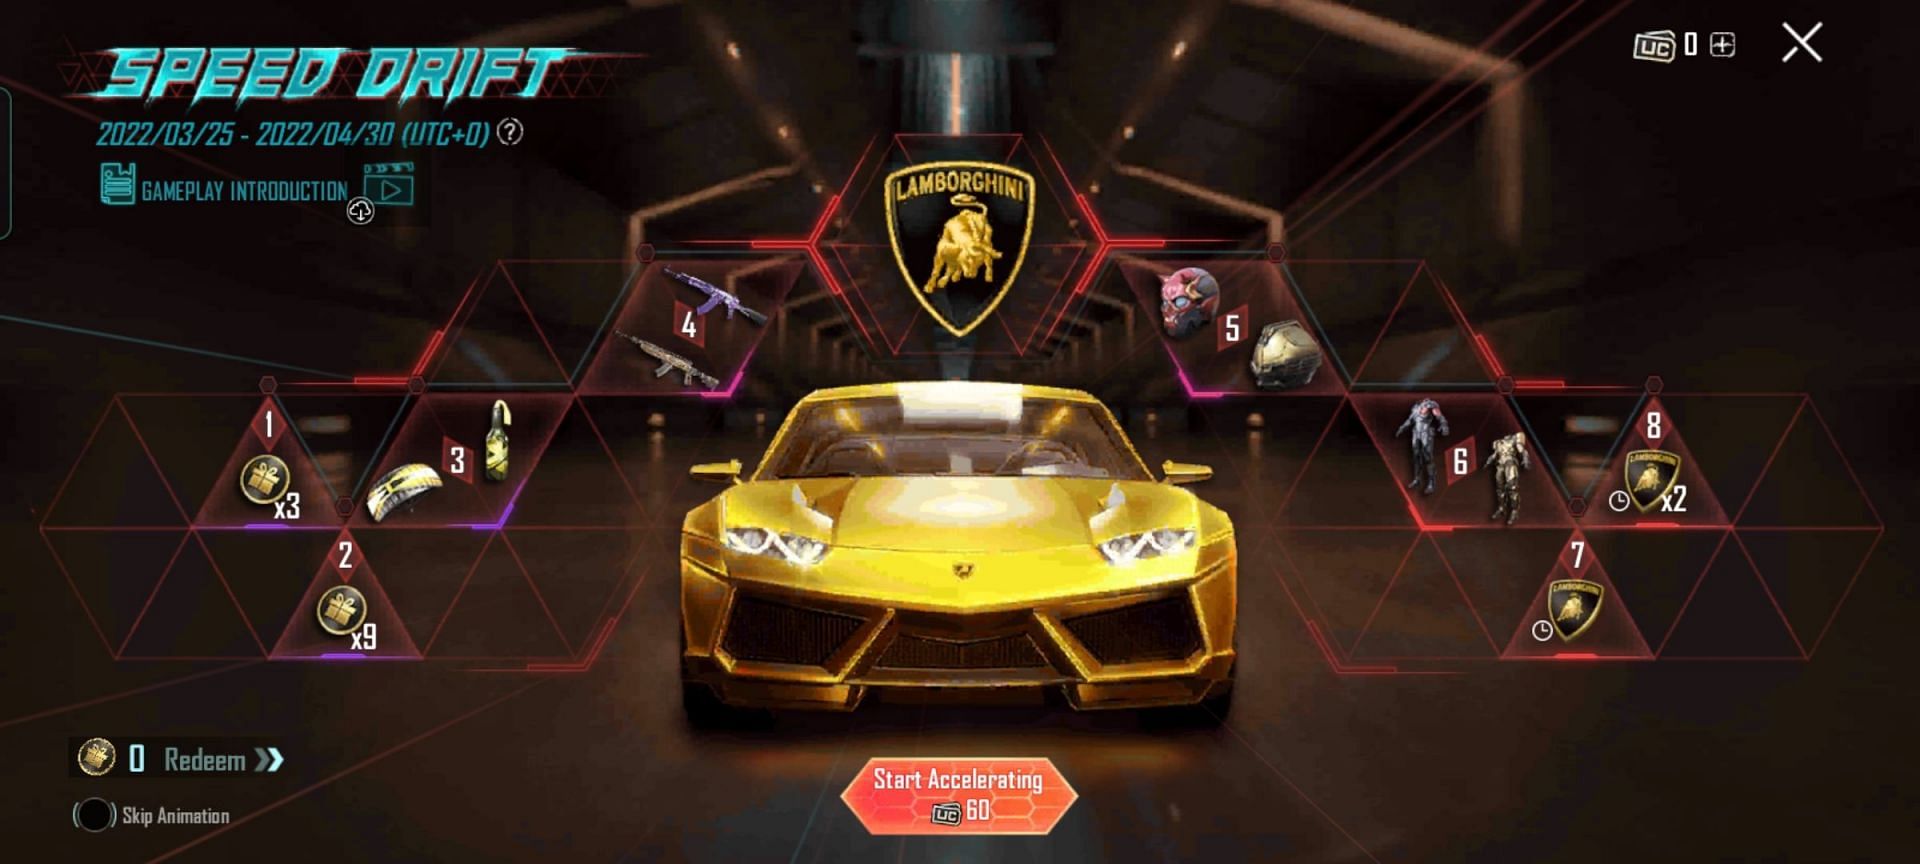 The new Speed Drift event in the game (Image via Krafton)